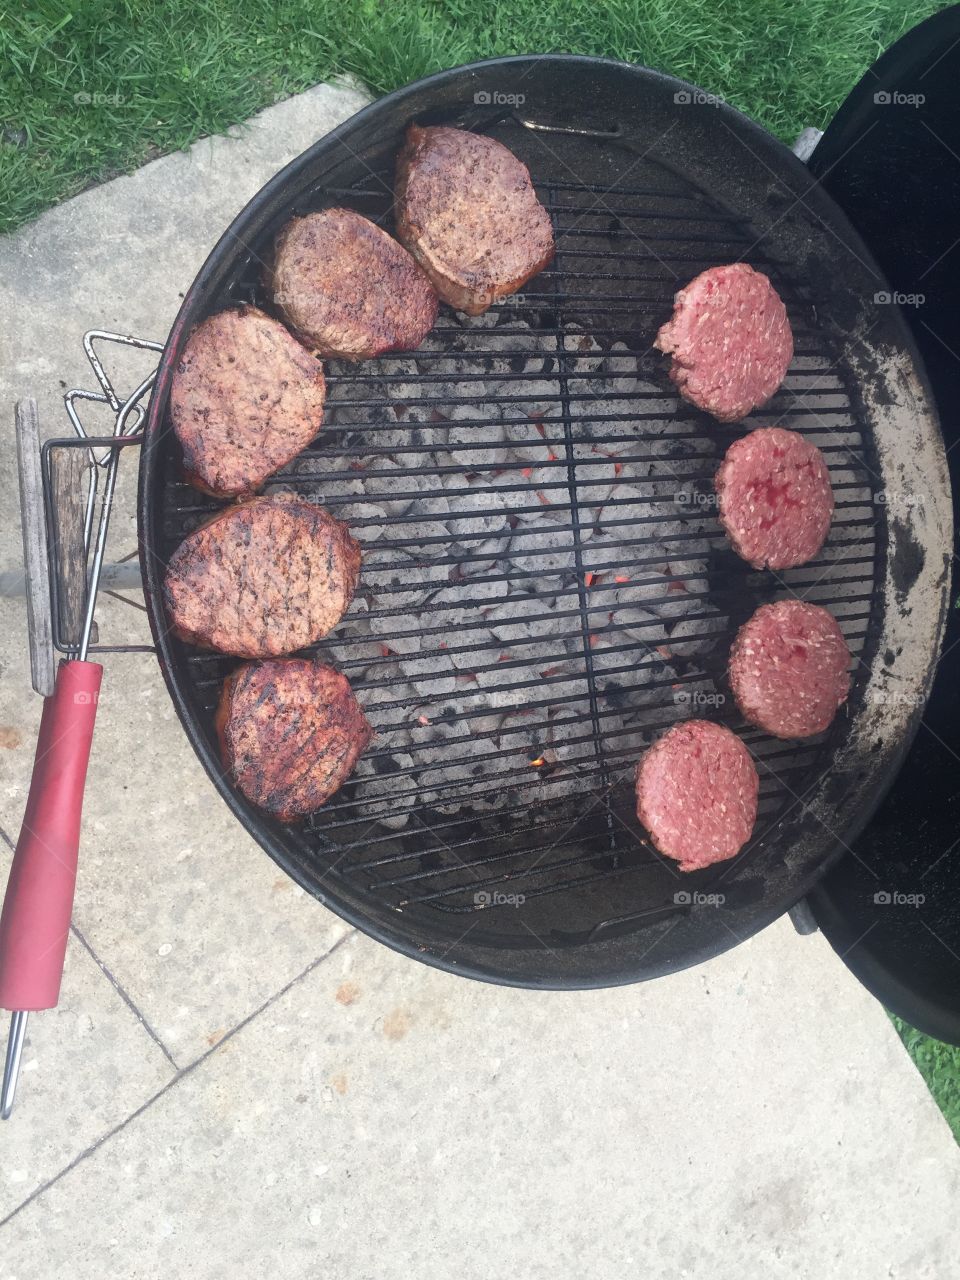 Steaks and burgers